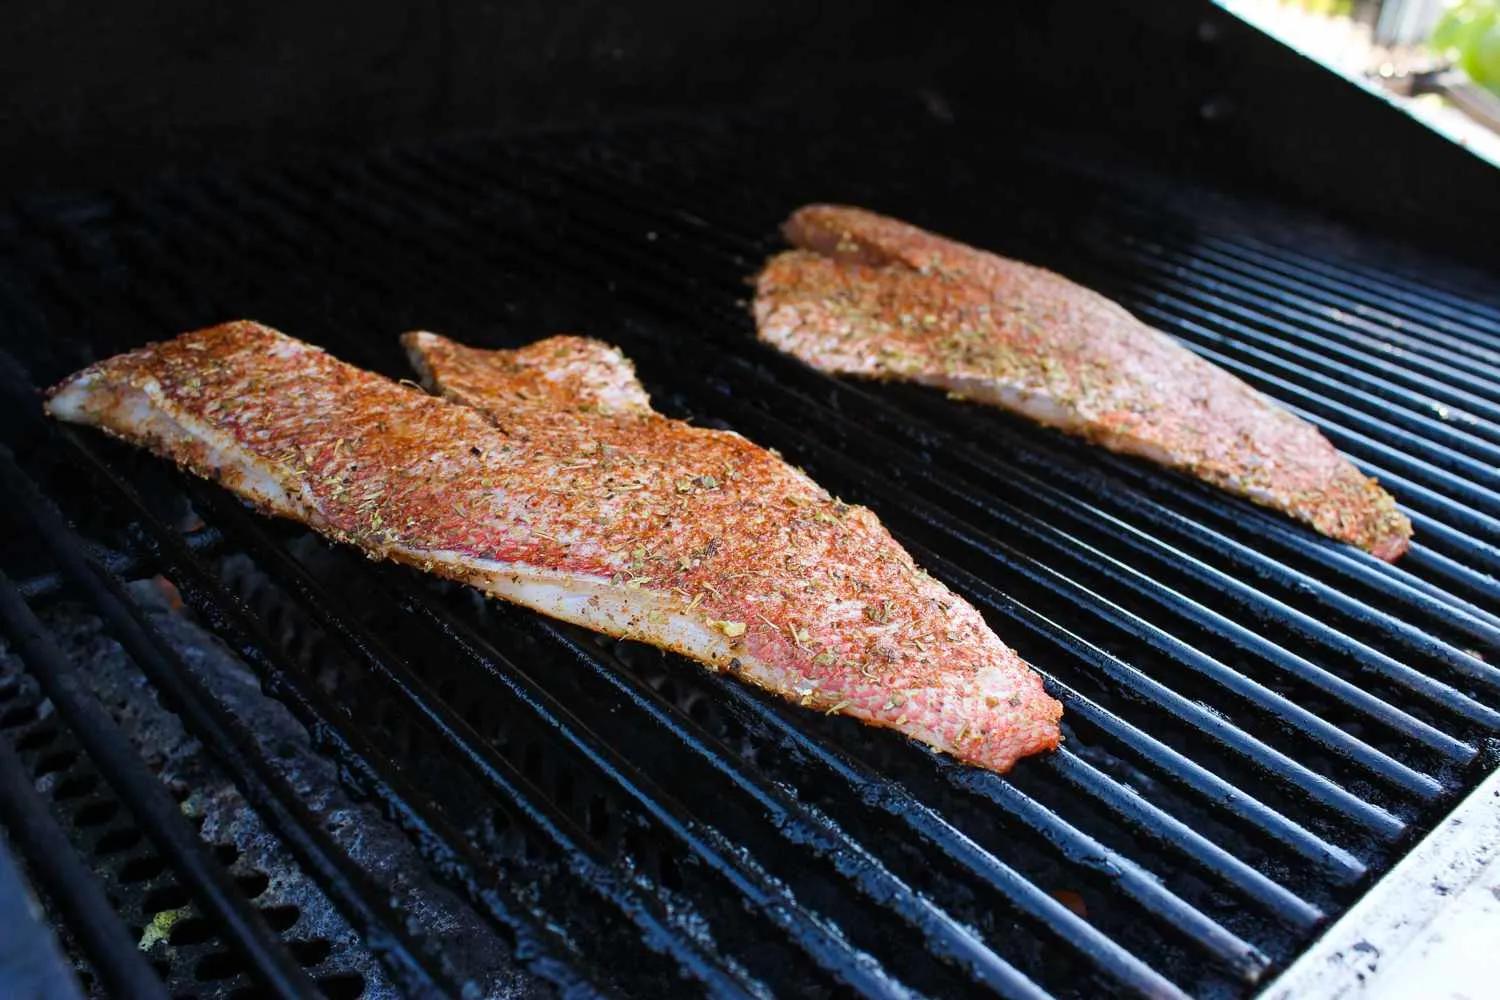 Grilled Blackened Red Snapper Recipe